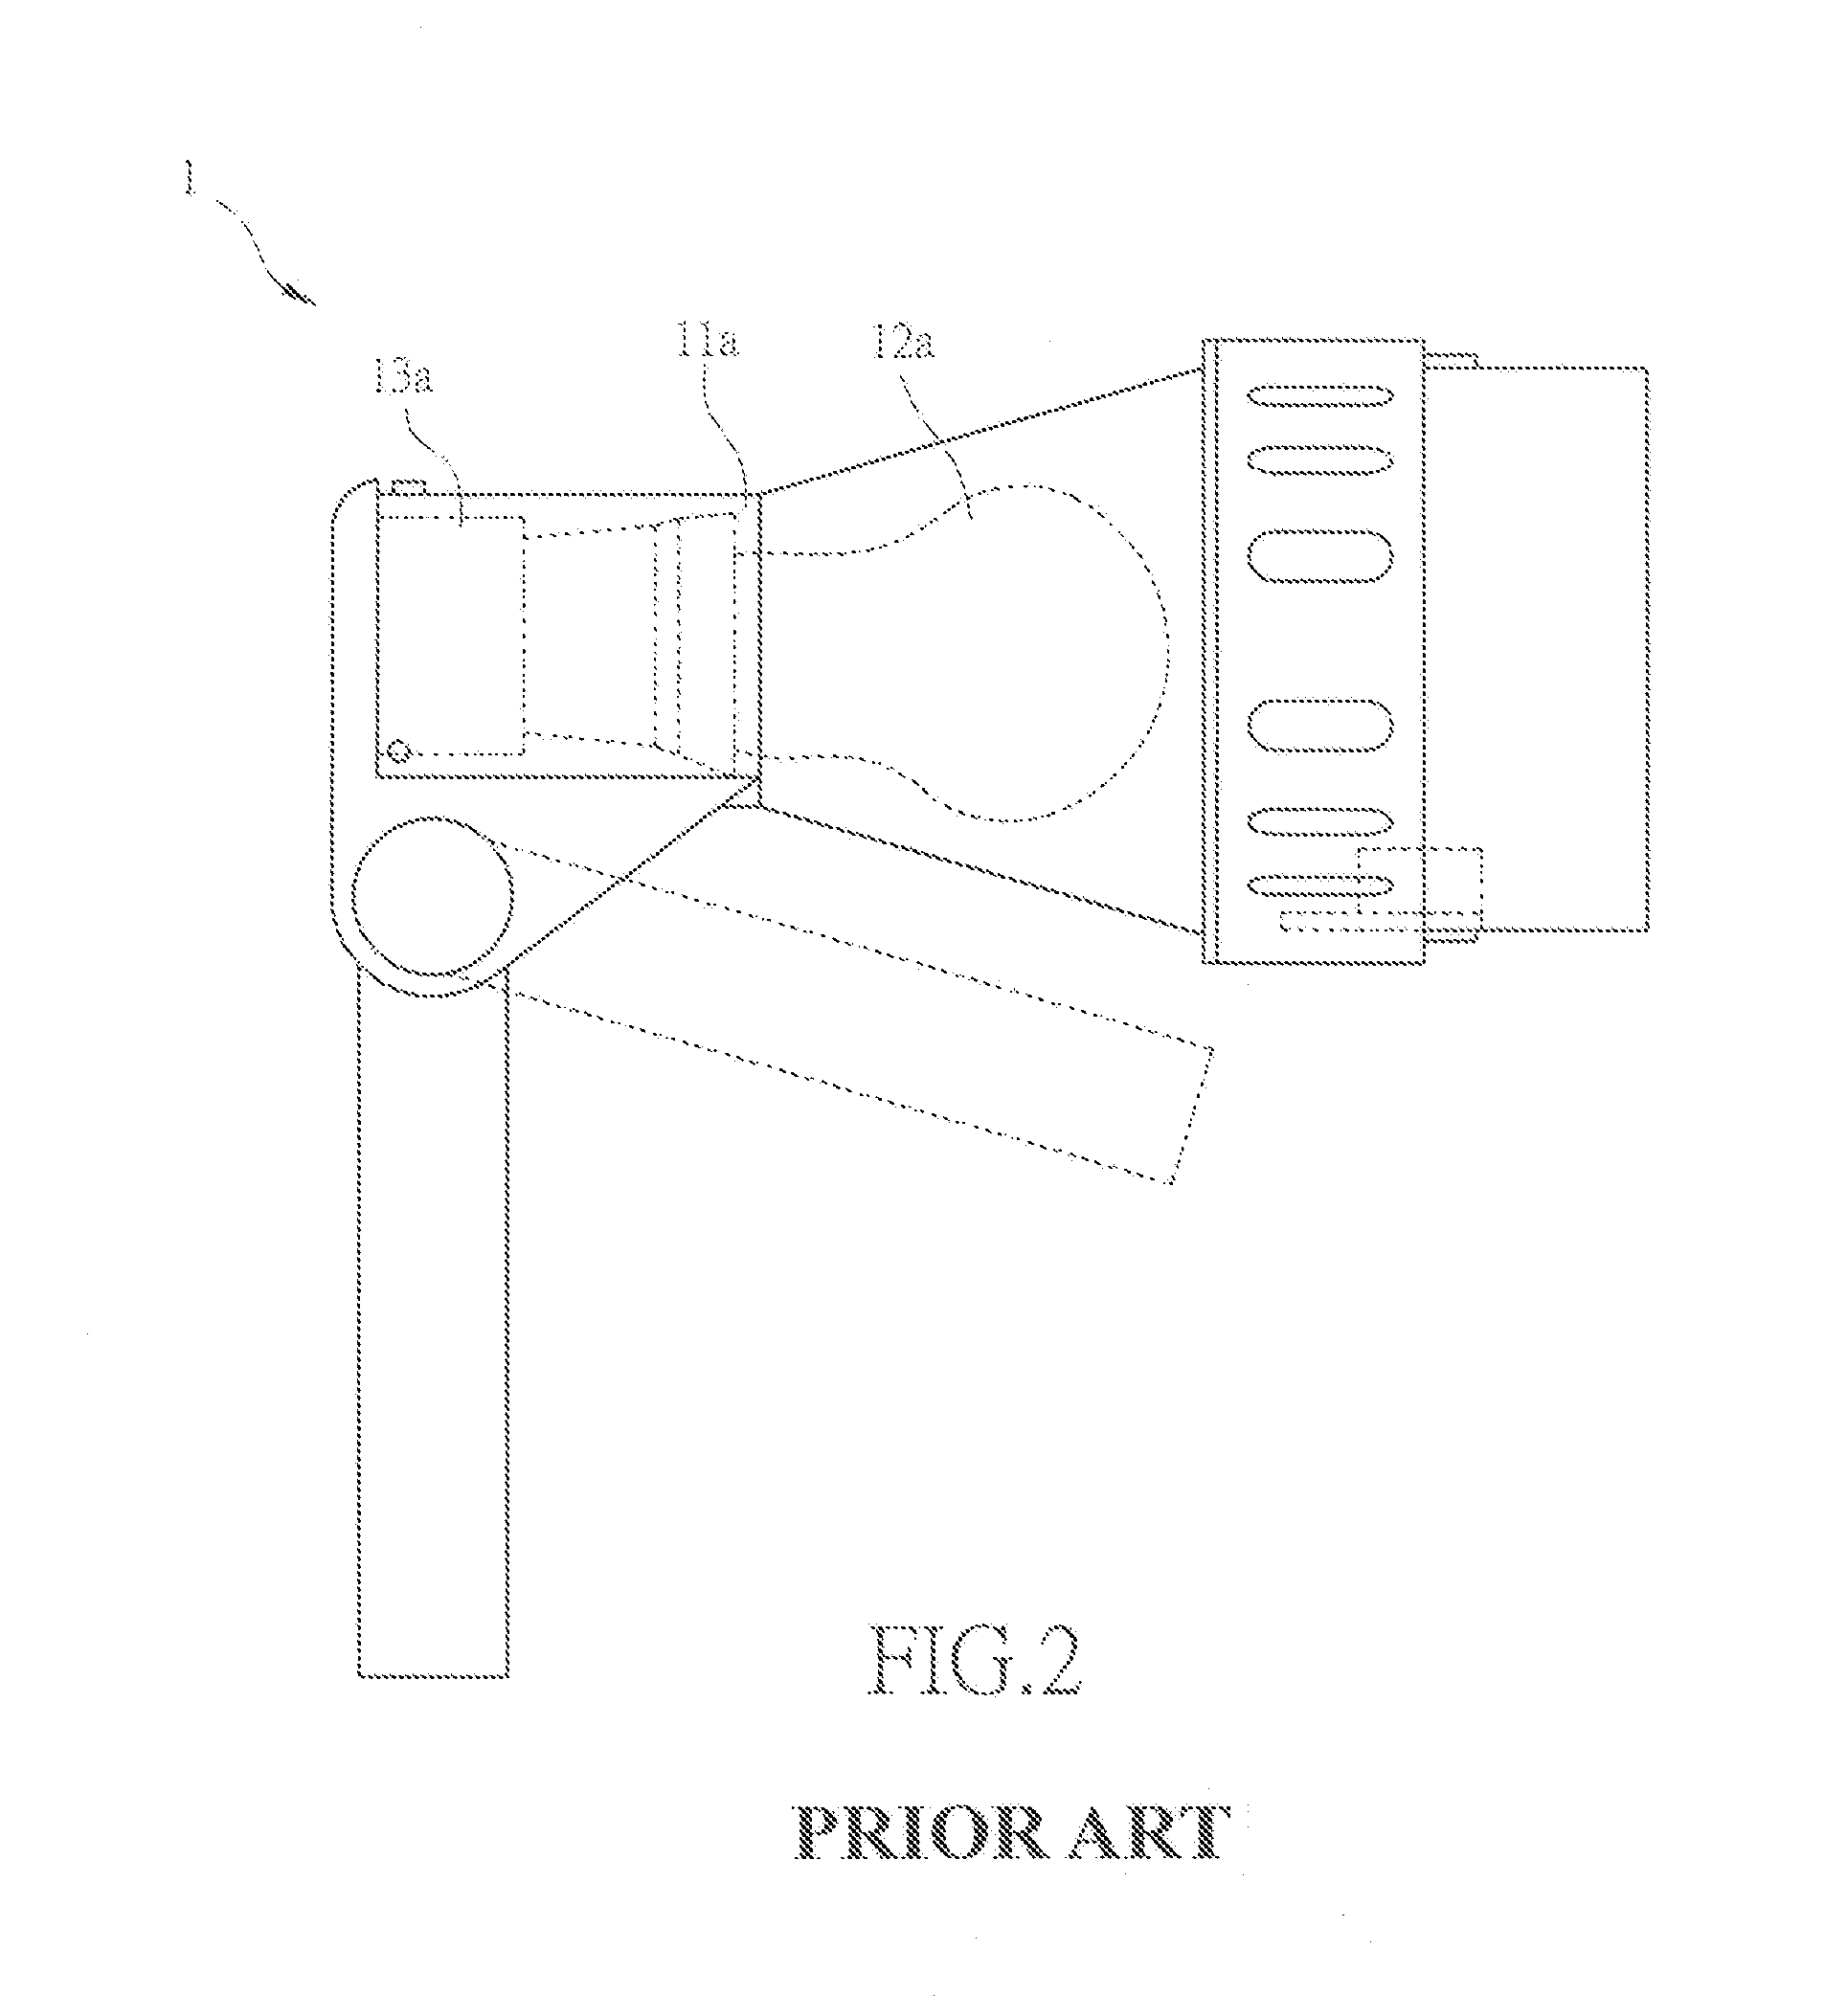 Electric heat therapy apparatus